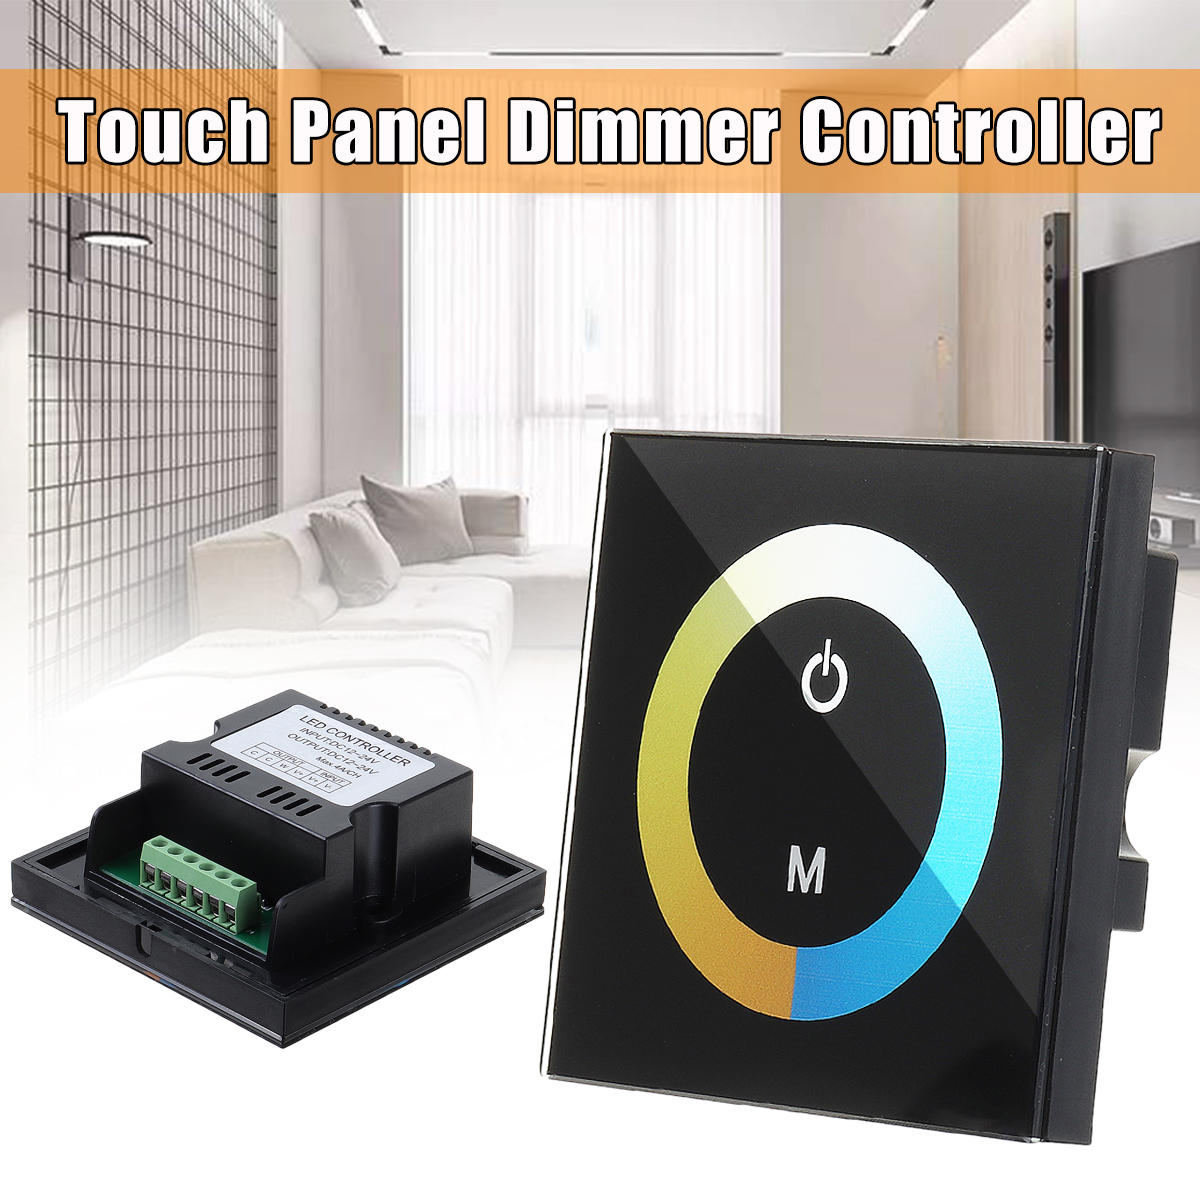 DC-12V-24V-LED-Light-Dimmer-Controller-Switch-Wall-Mounted-Sensitive-Touch-Panel-Dimmer-Switch-1610039-1